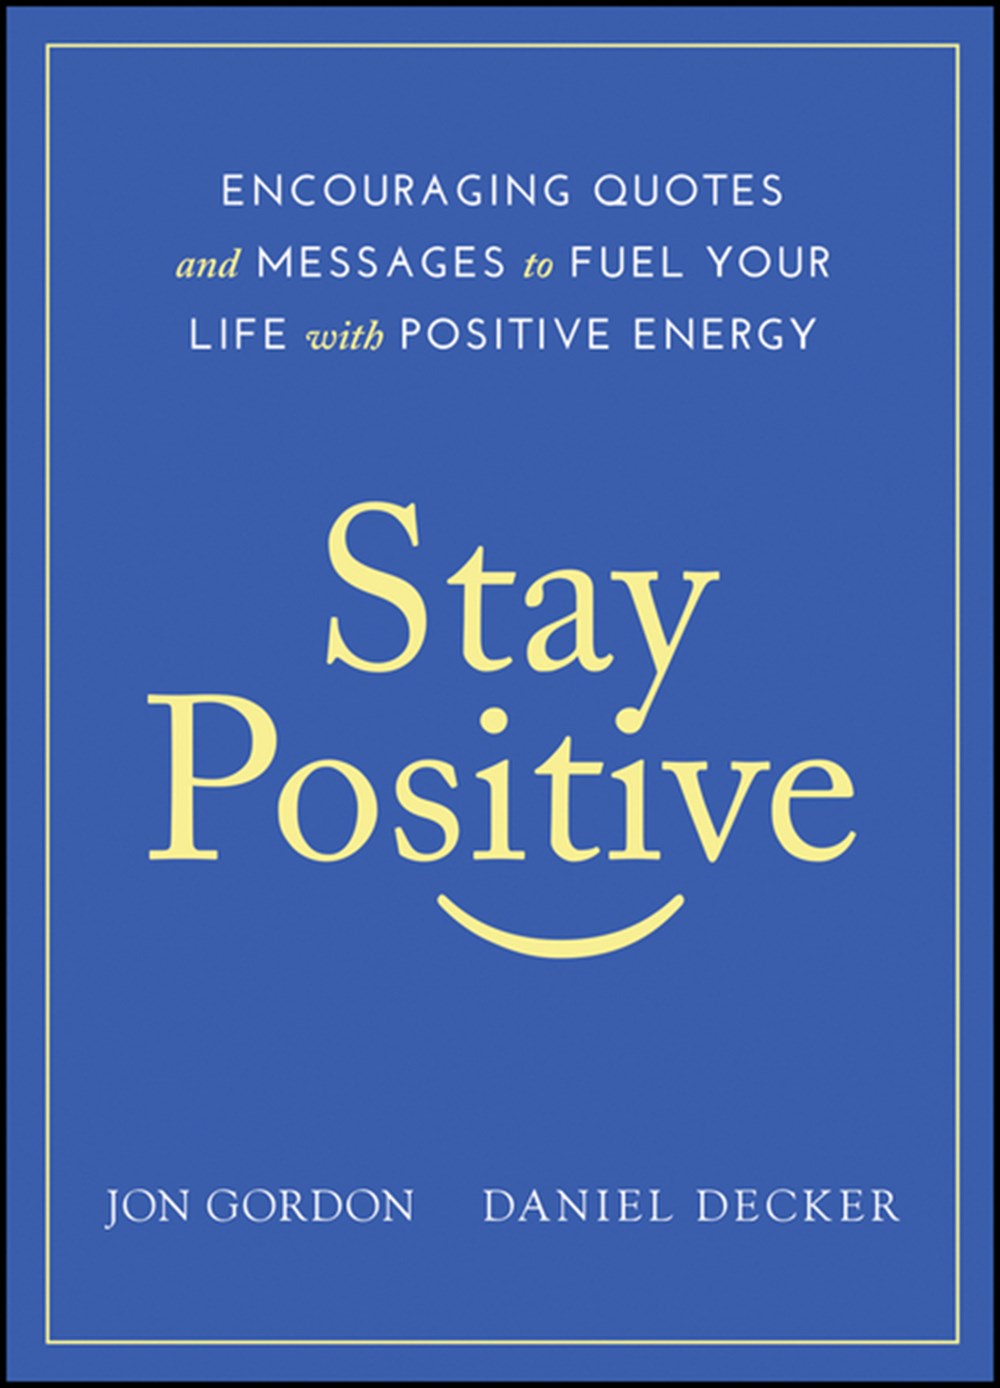 Stay Positive Encouraging Quotes and Messages to Fuel Your Life with Positive Energy